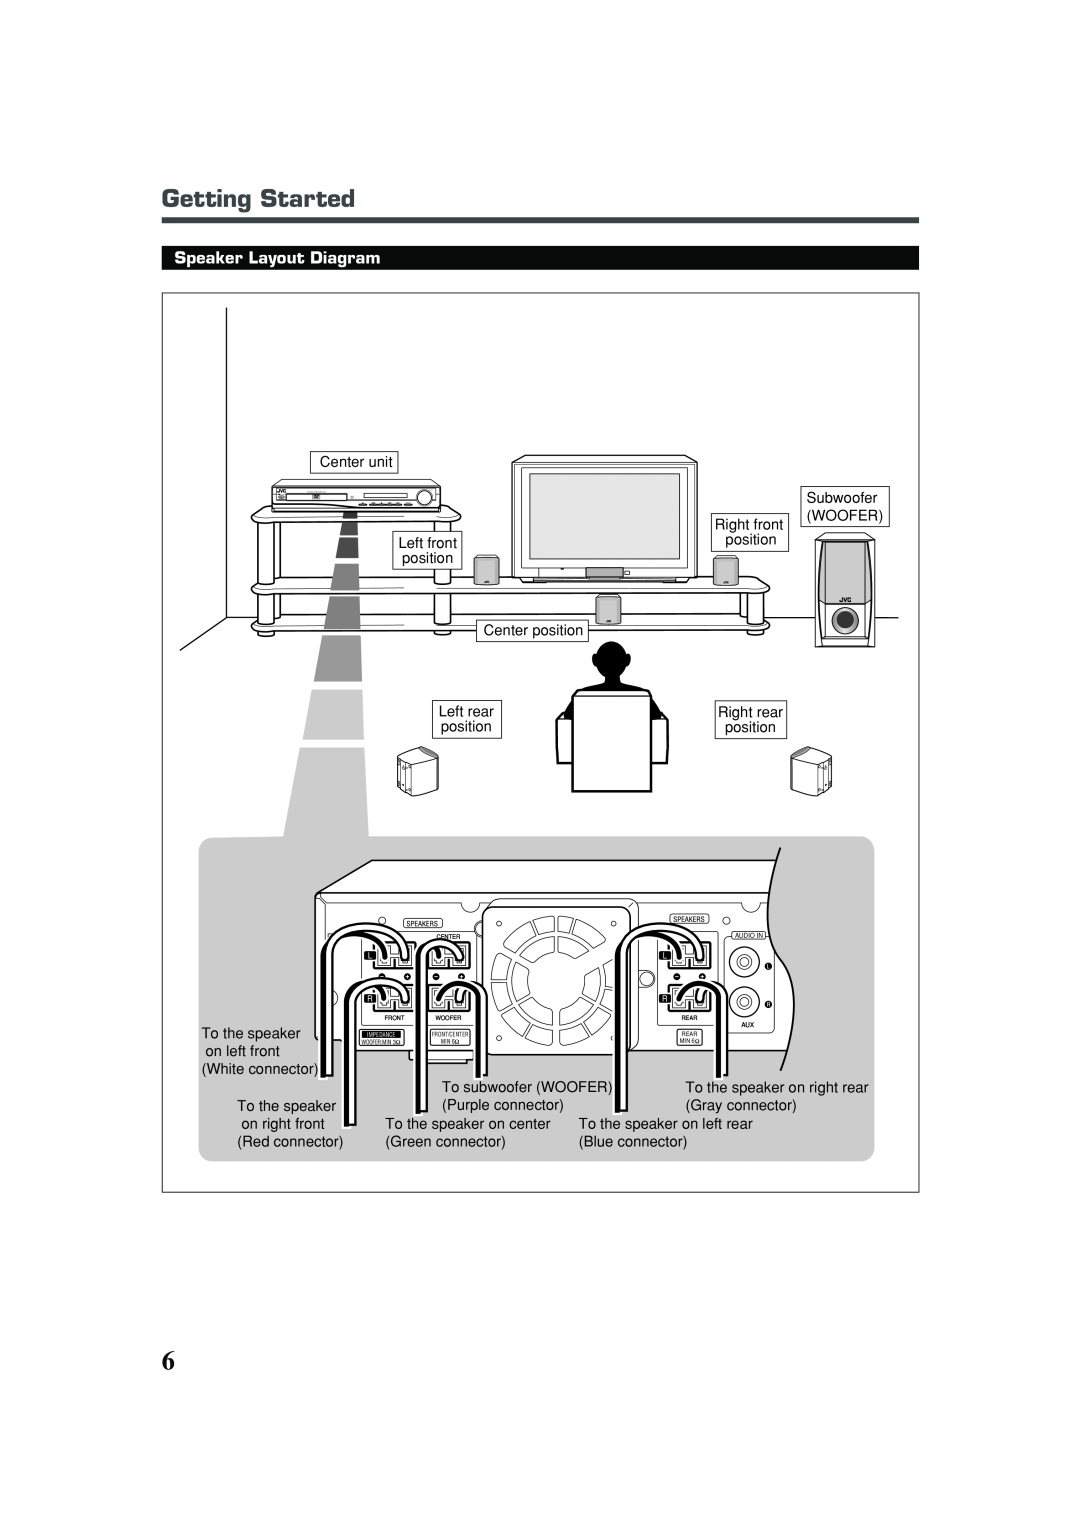 JVC TH-A25 manual Getting Started, Speaker Layout Diagram 